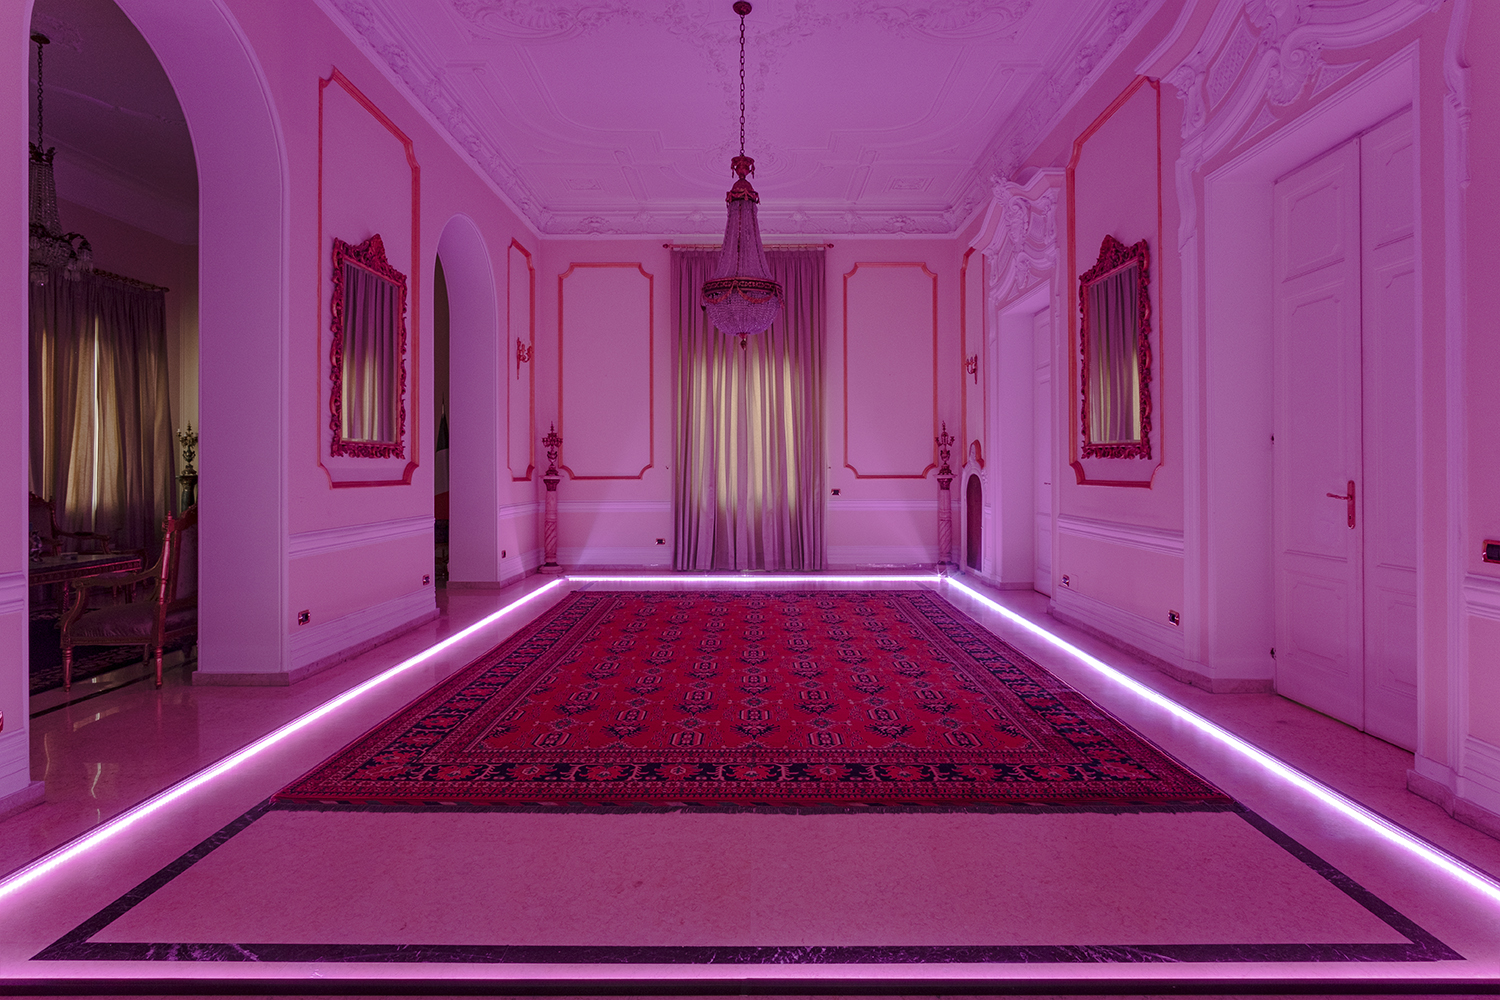 LED lights for indoor cultivation are placed along the edges of the Islamic rugs